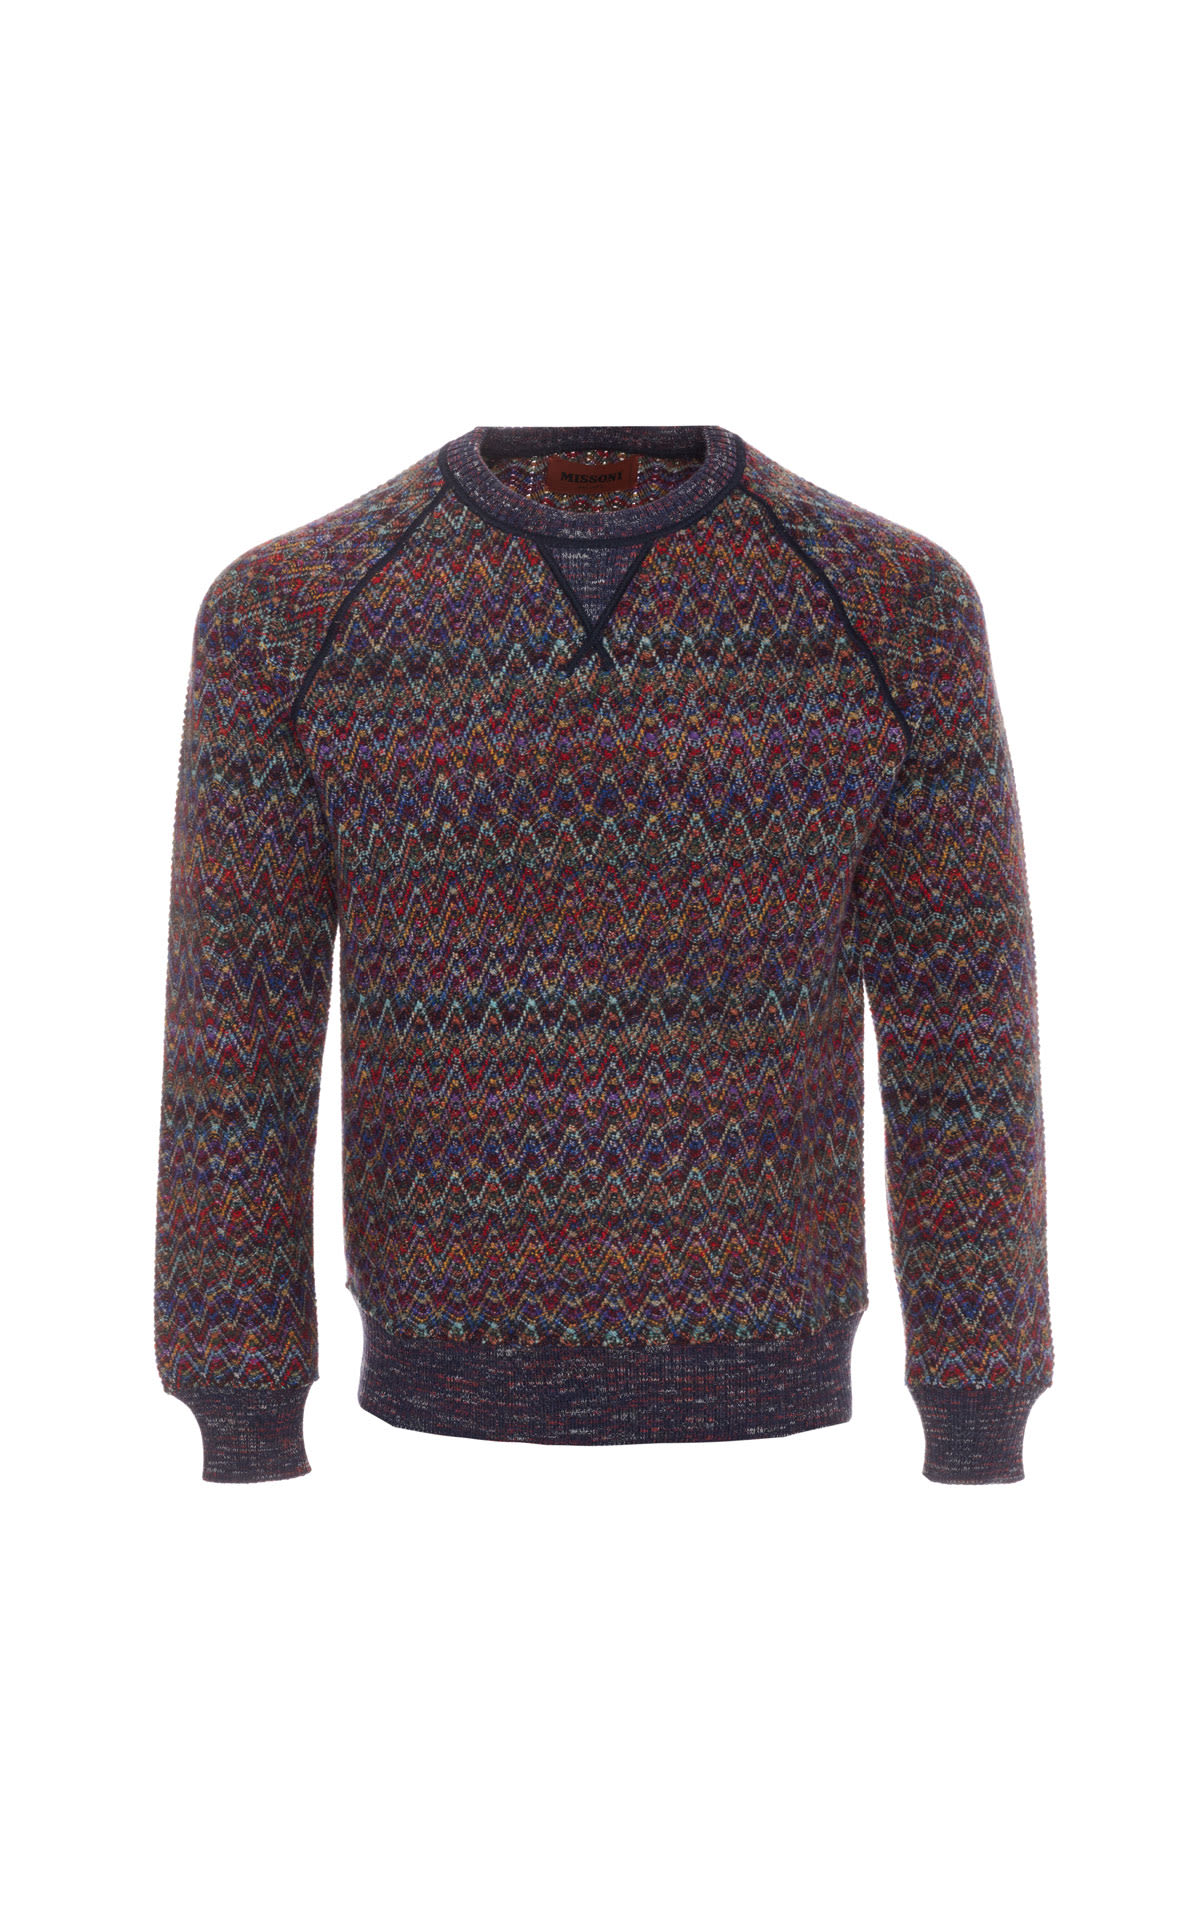 Missoni Long sleeve crew neck from Bicester Village